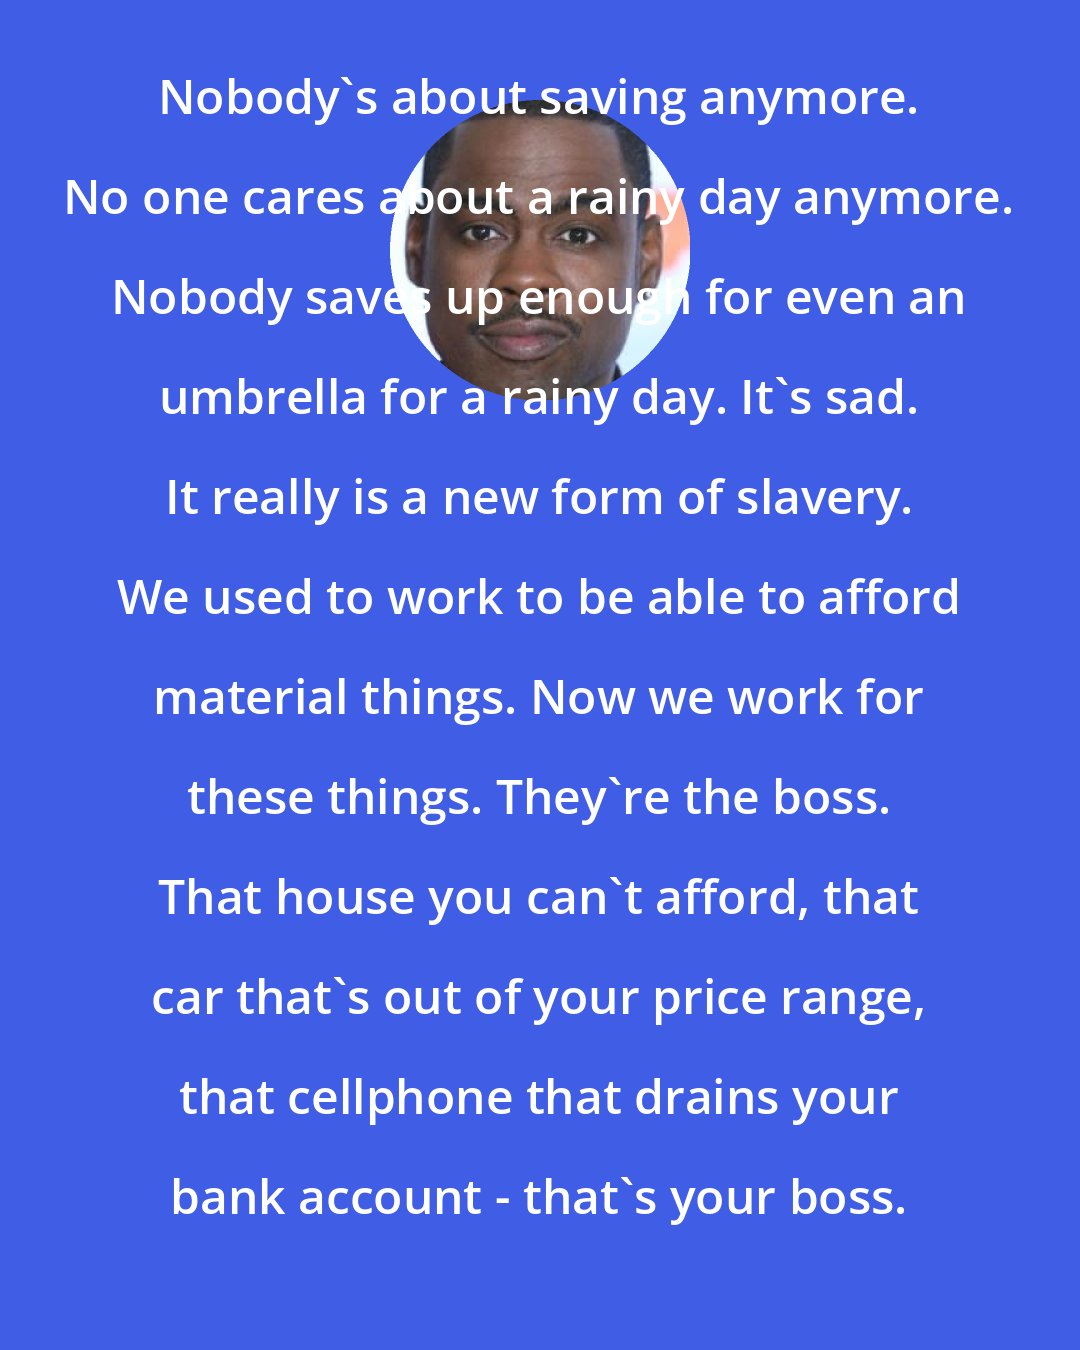 Chris Rock: Nobody's about saving anymore. No one cares about a rainy day anymore. Nobody saves up enough for even an umbrella for a rainy day. It's sad. It really is a new form of slavery. We used to work to be able to afford material things. Now we work for these things. They're the boss. That house you can't afford, that car that's out of your price range, that cellphone that drains your bank account - that's your boss.